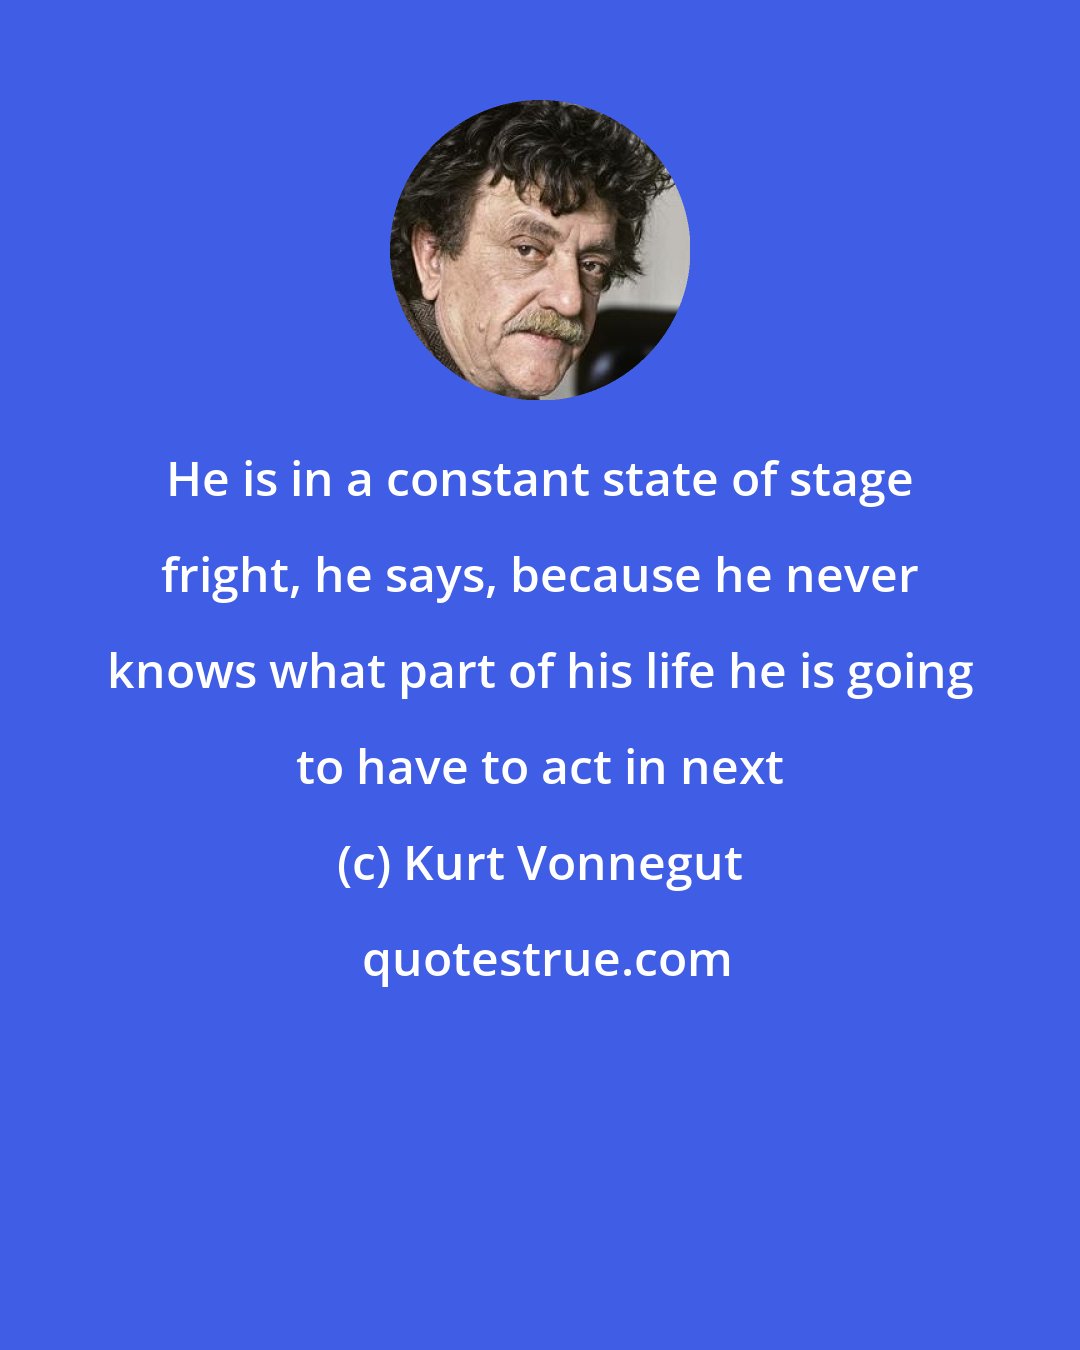 Kurt Vonnegut: He is in a constant state of stage fright, he says, because he never knows what part of his life he is going to have to act in next